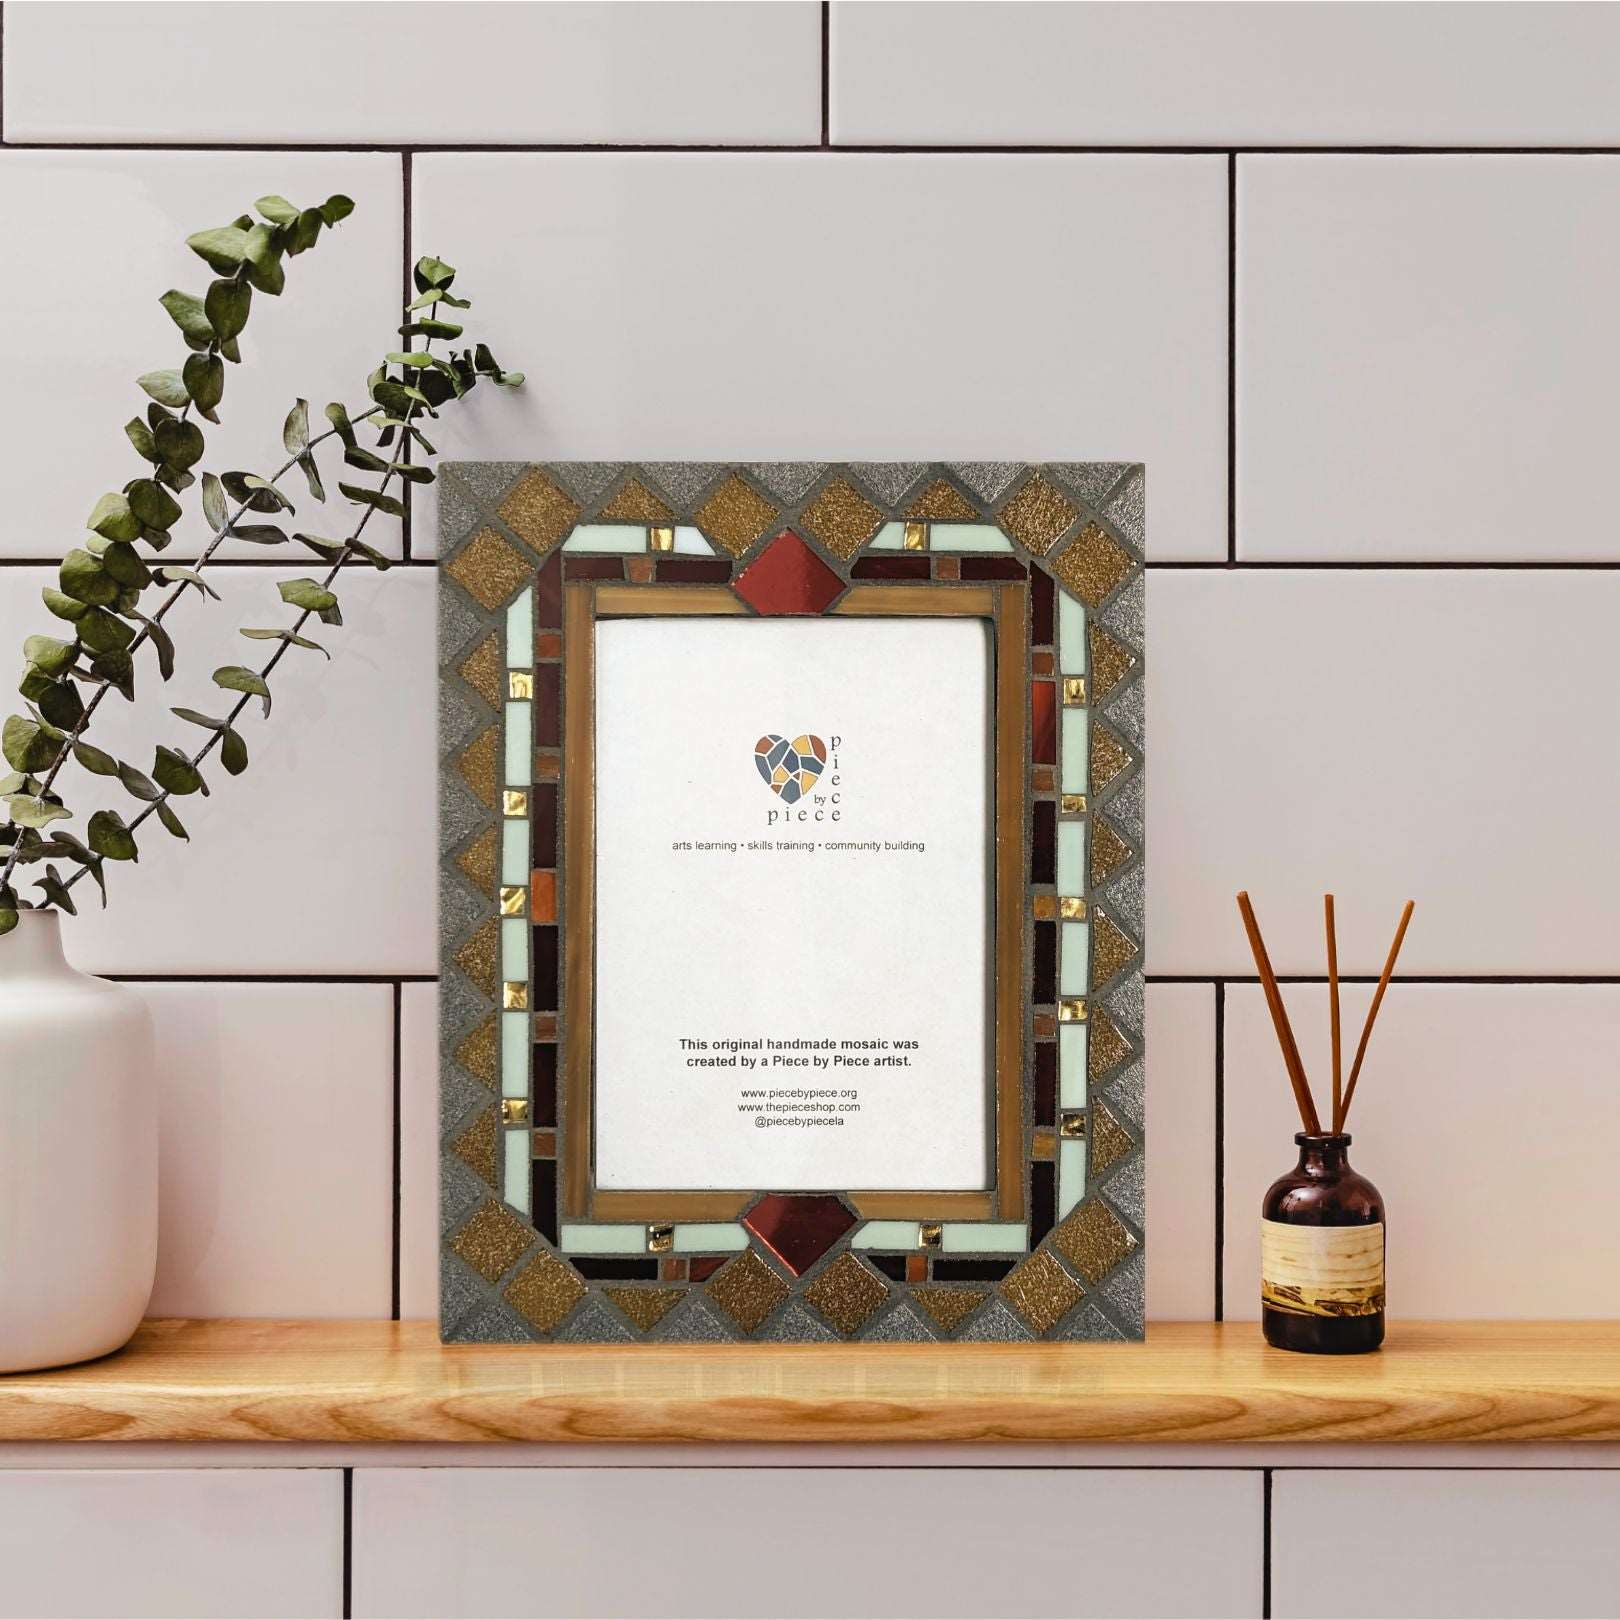 Jewel-toned mosaic frame with gold details.